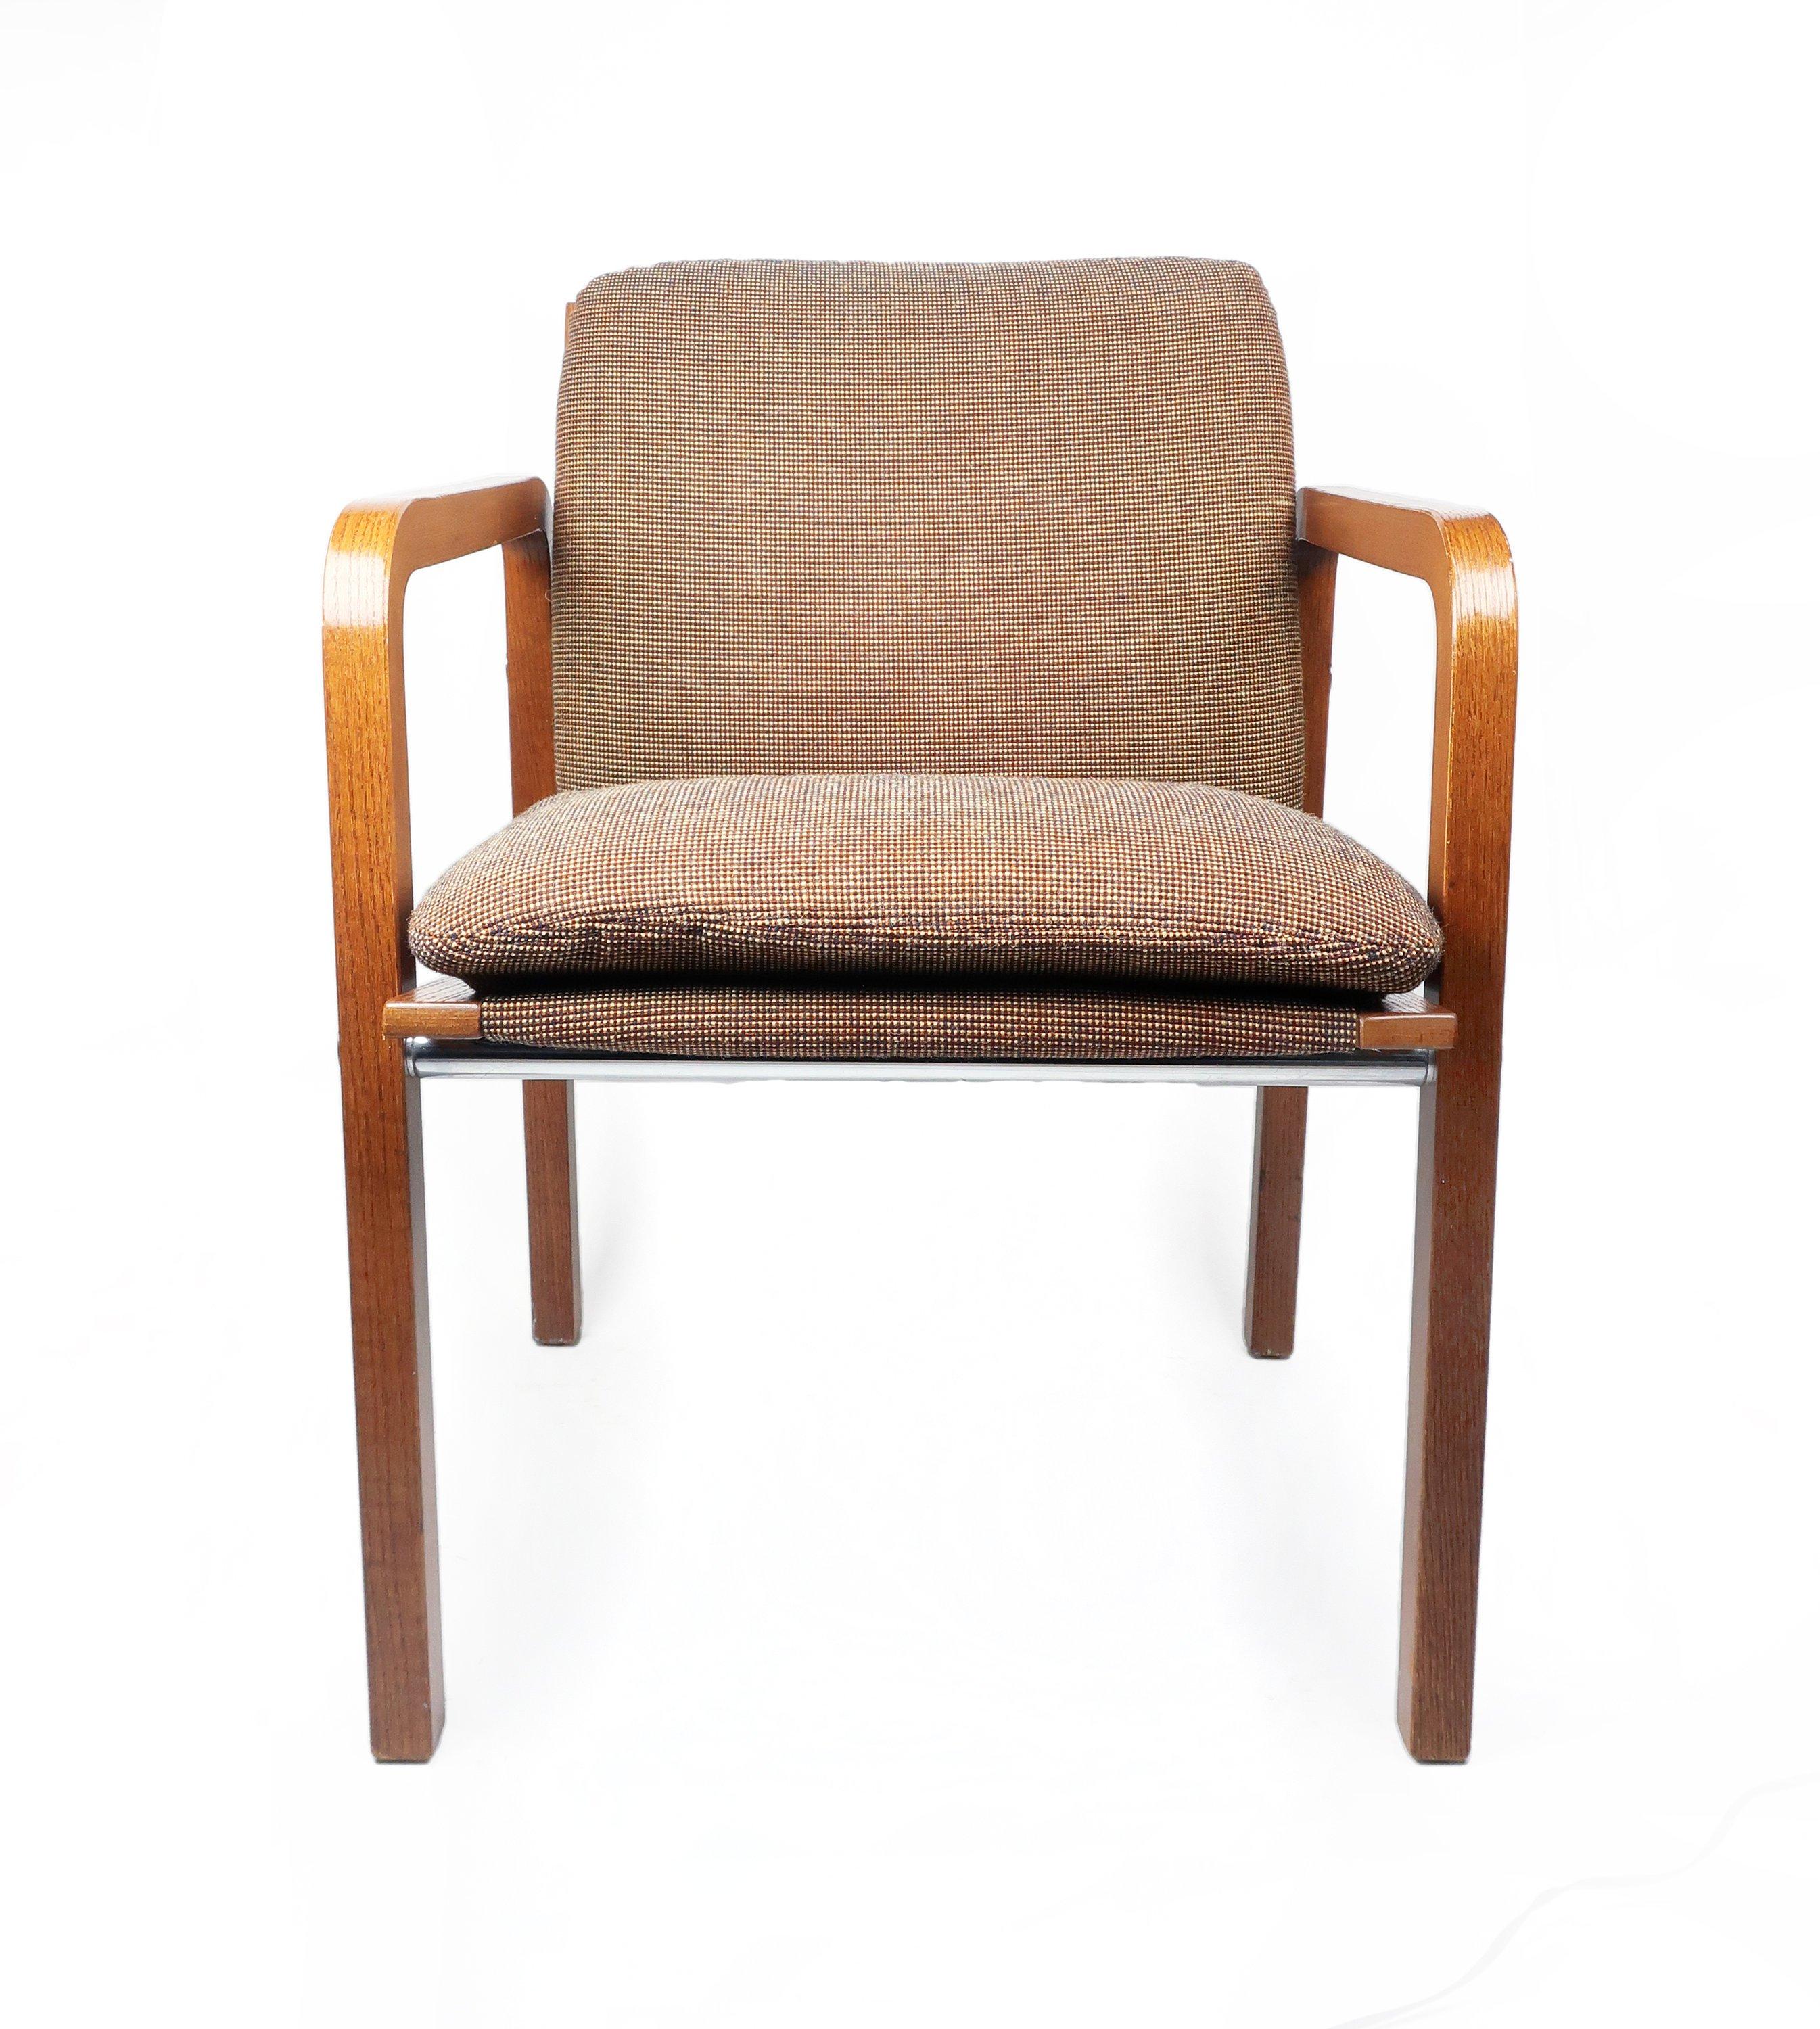 A Mid-Century Modern upholstered bentwood armchair by Thonet. Retains the original light brown wool upholstery on a beautiful oak frame with chrome accents.
 
 Seat cushion was recently reinforced to ensure many more years of comfortable sitting!